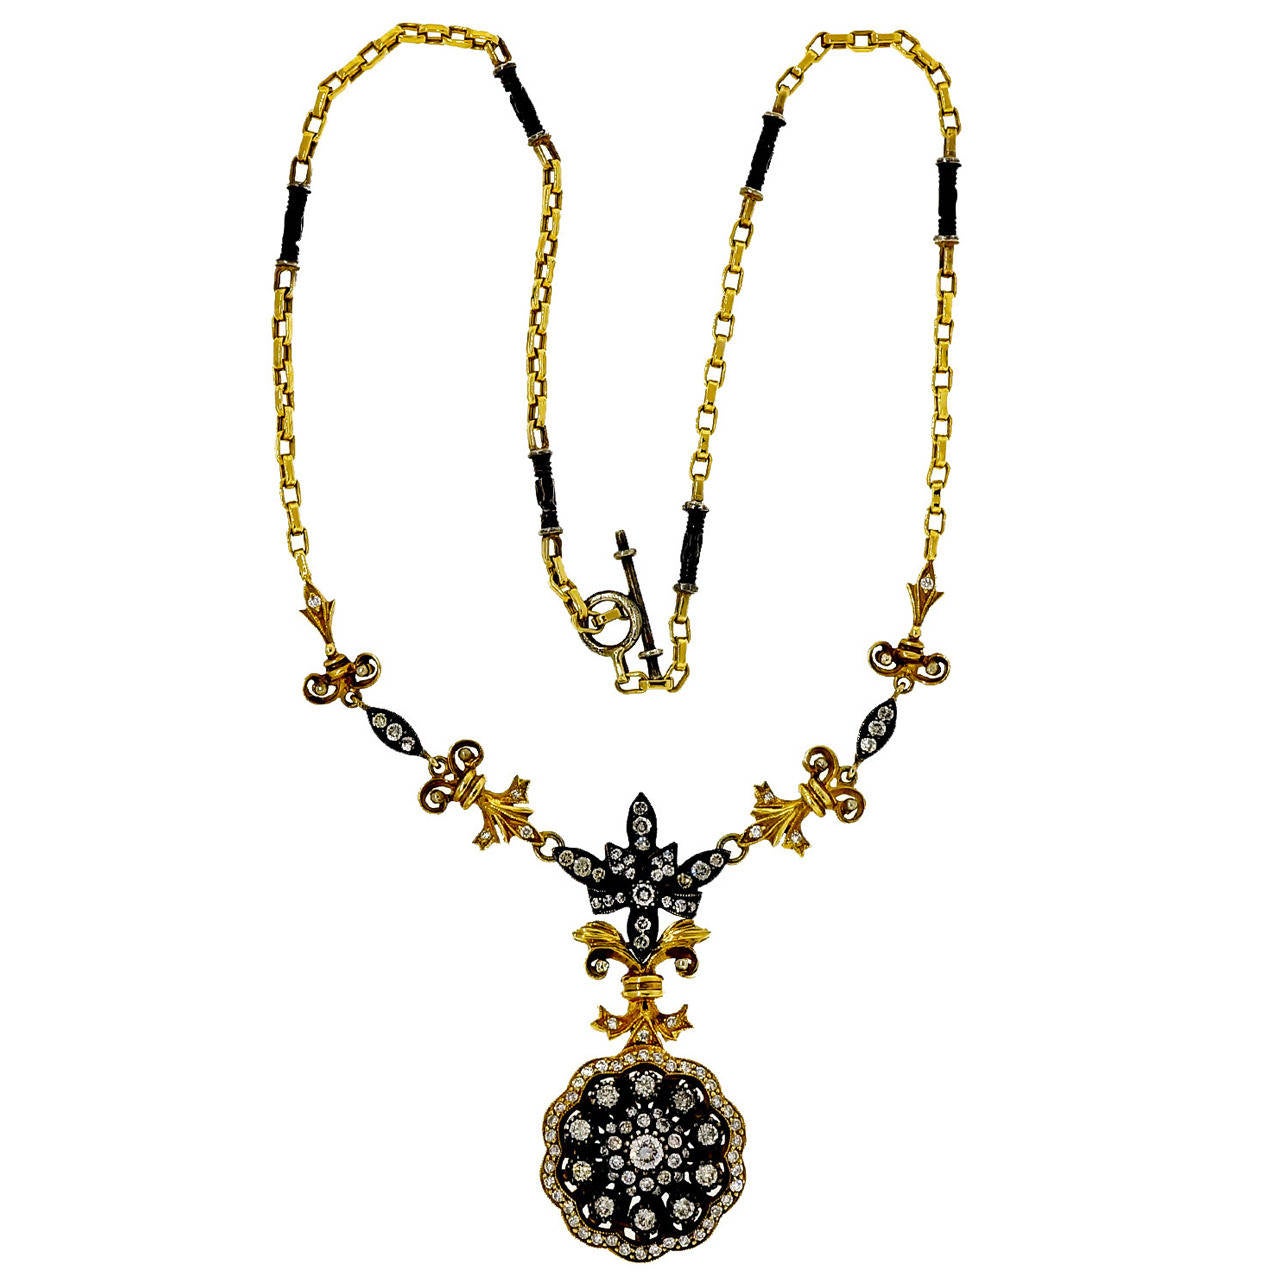 Eutruscian style pendant necklace in 18k yellow gold and blackened silver and brown diamonds accents. 

Approximately 100 round diamonds, approx. total weight 2.60cts, J-K-L, SI
18k yellow gold and silver
29.0 grams
Tested: 18k and silver
Stamped: